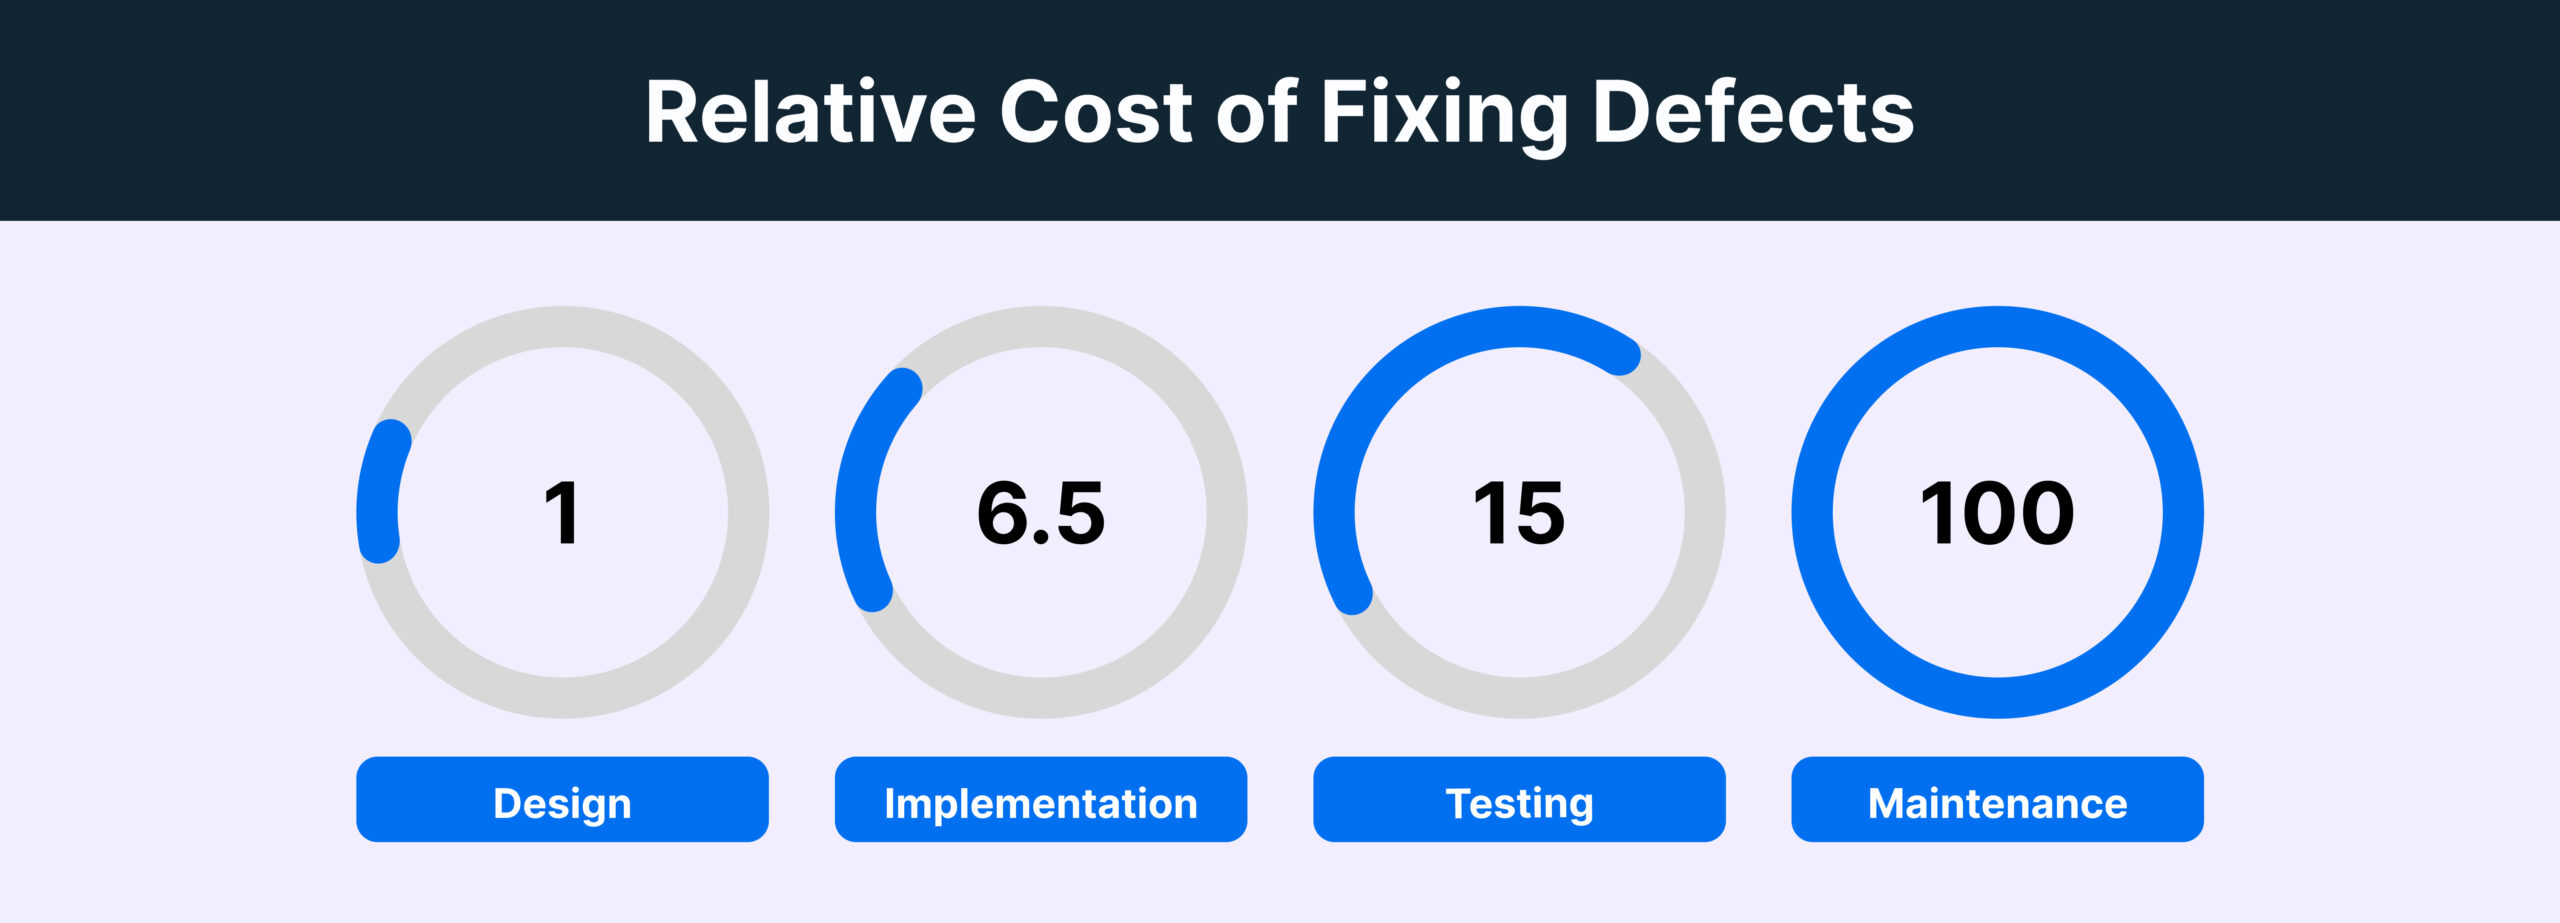 Relative Cost of Fixing Defects scaled